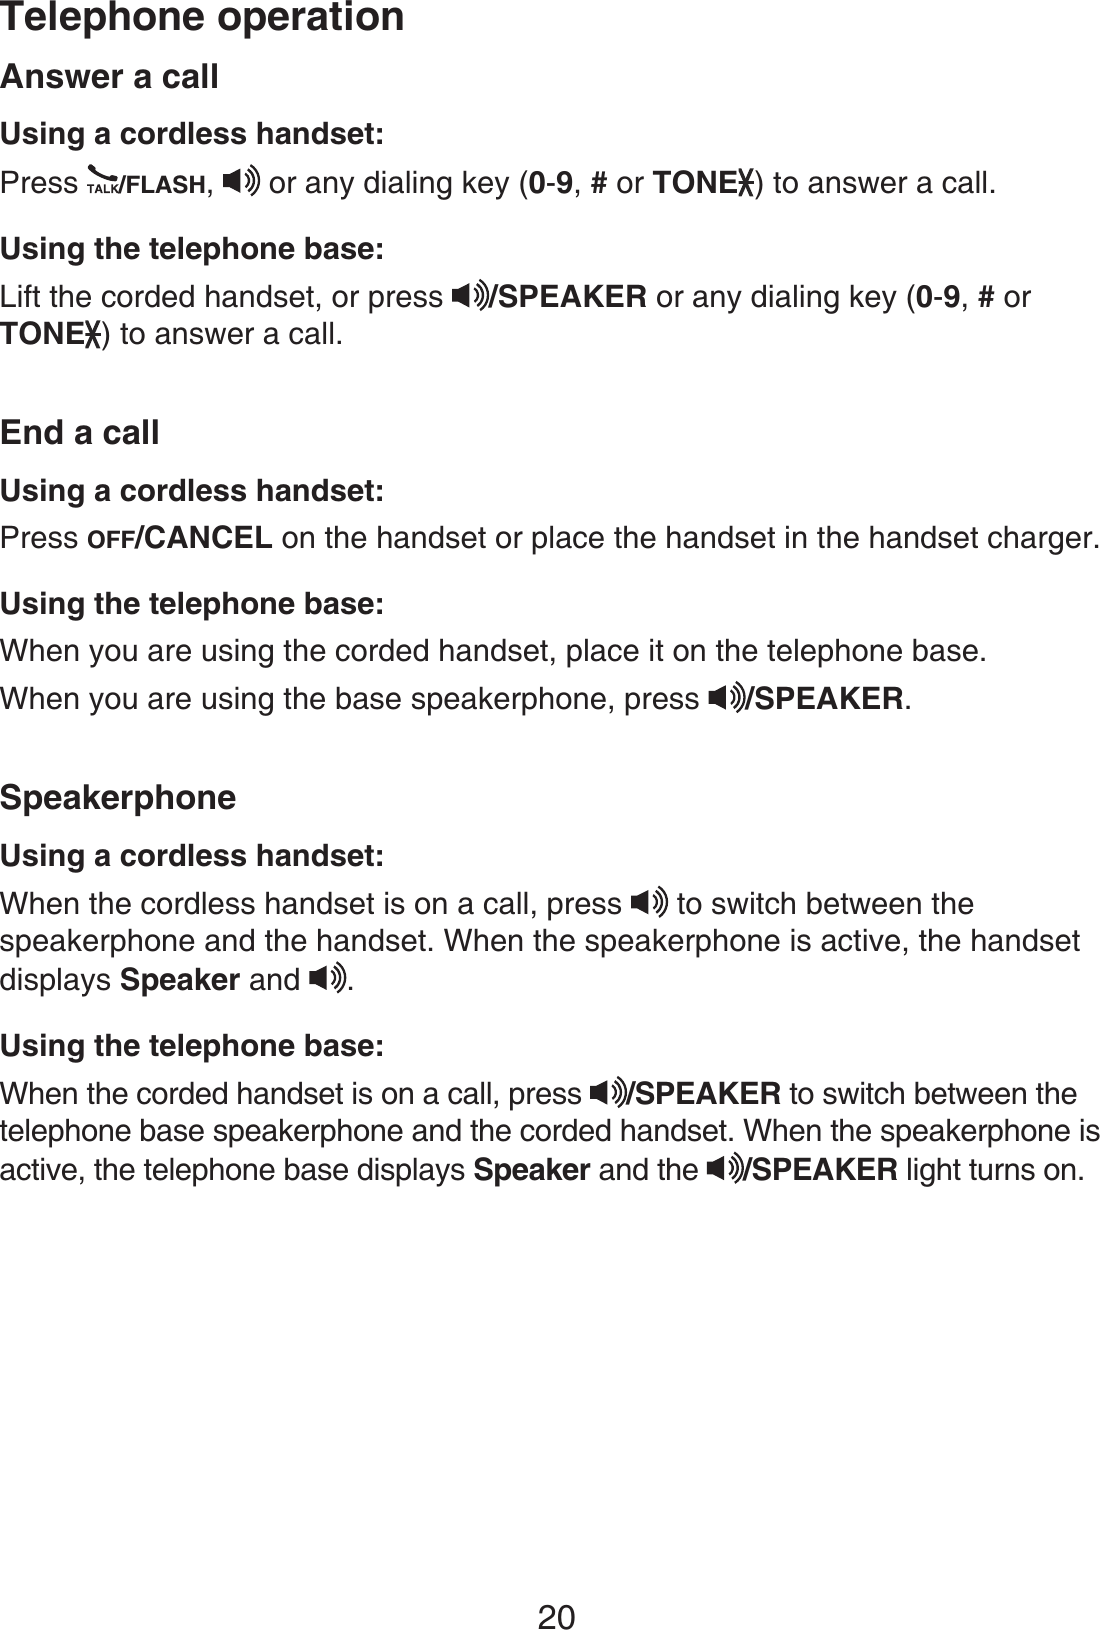 Telephone operation20Answer a callUsing a cordless handset:Press /FLASH,or any dialing key (0-9,# or TONE ) to answer a call.Using the telephone base:Lift the corded handset, or press /SPEAKER or any dialing key (0-9,# or TONE ) to answer a call.End a callUsing a cordless handset:Press OFF/CANCEL on the handset or place the handset in the handset charger.Using the telephone base:When you are using the corded handset, place it on the telephone base.When you are using the base speakerphone, press /SPEAKER.SpeakerphoneUsing a cordless handset:When the cordless handset is on a call, press to switch between thespeakerphone and the handset. When the speakerphone is active, the handsetdisplays Speaker and .Using the telephone base:When the corded handset is on a call, press /SPEAKER to switch between the telephone base speakerphone and the corded handset. When the speakerphone is active, the telephone base displays Speaker and the /SPEAKER light turns on.